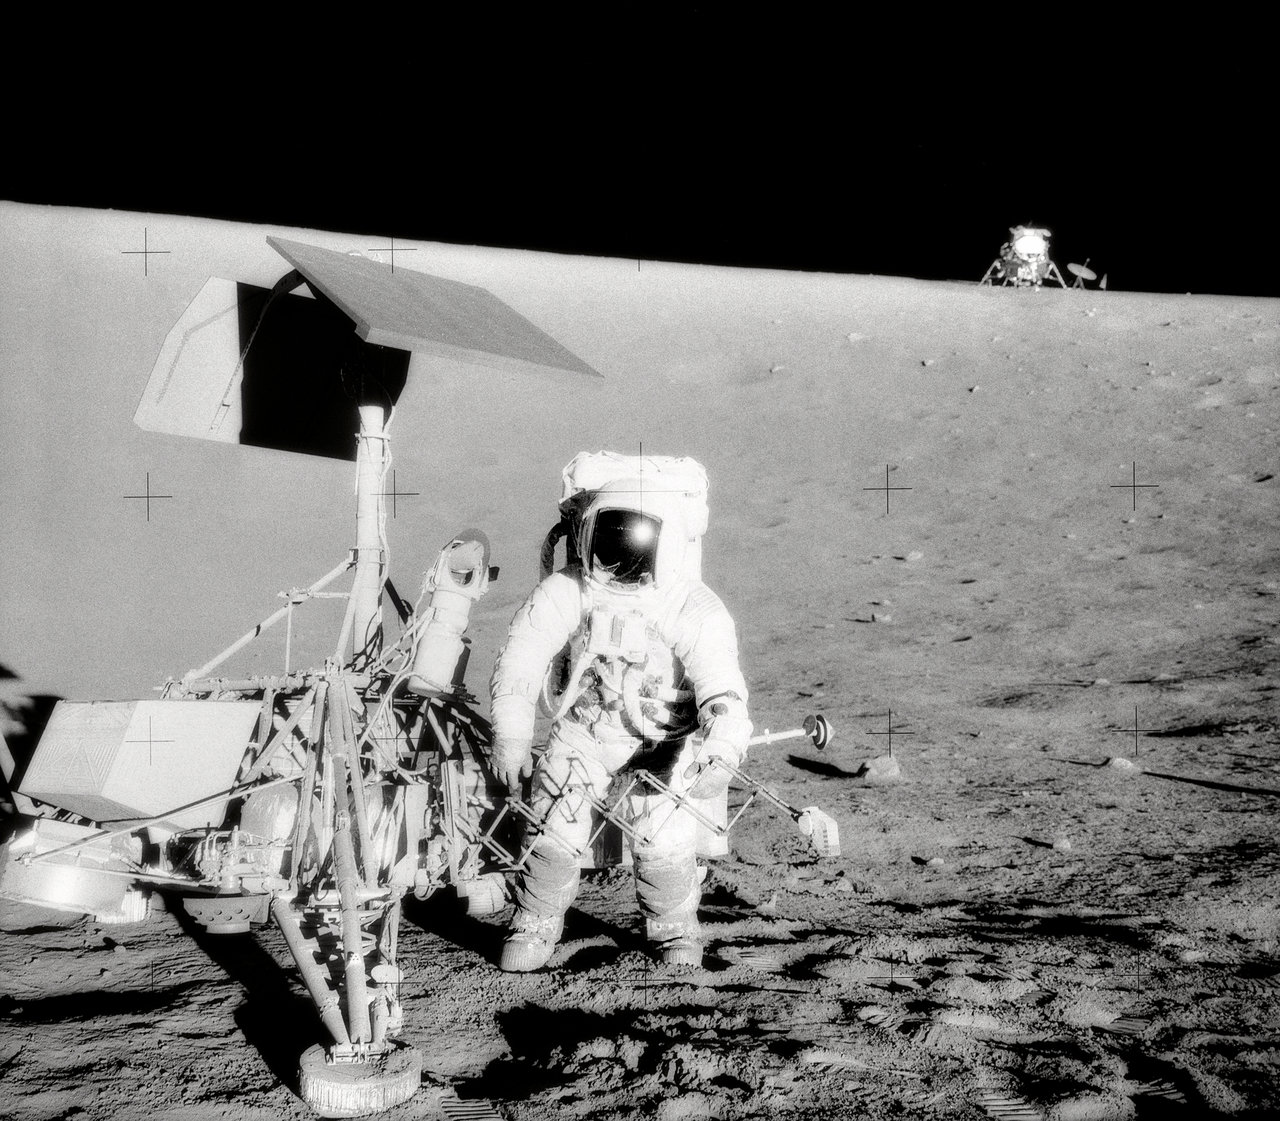 Astronaut and robotic spacecraft on the Moon.